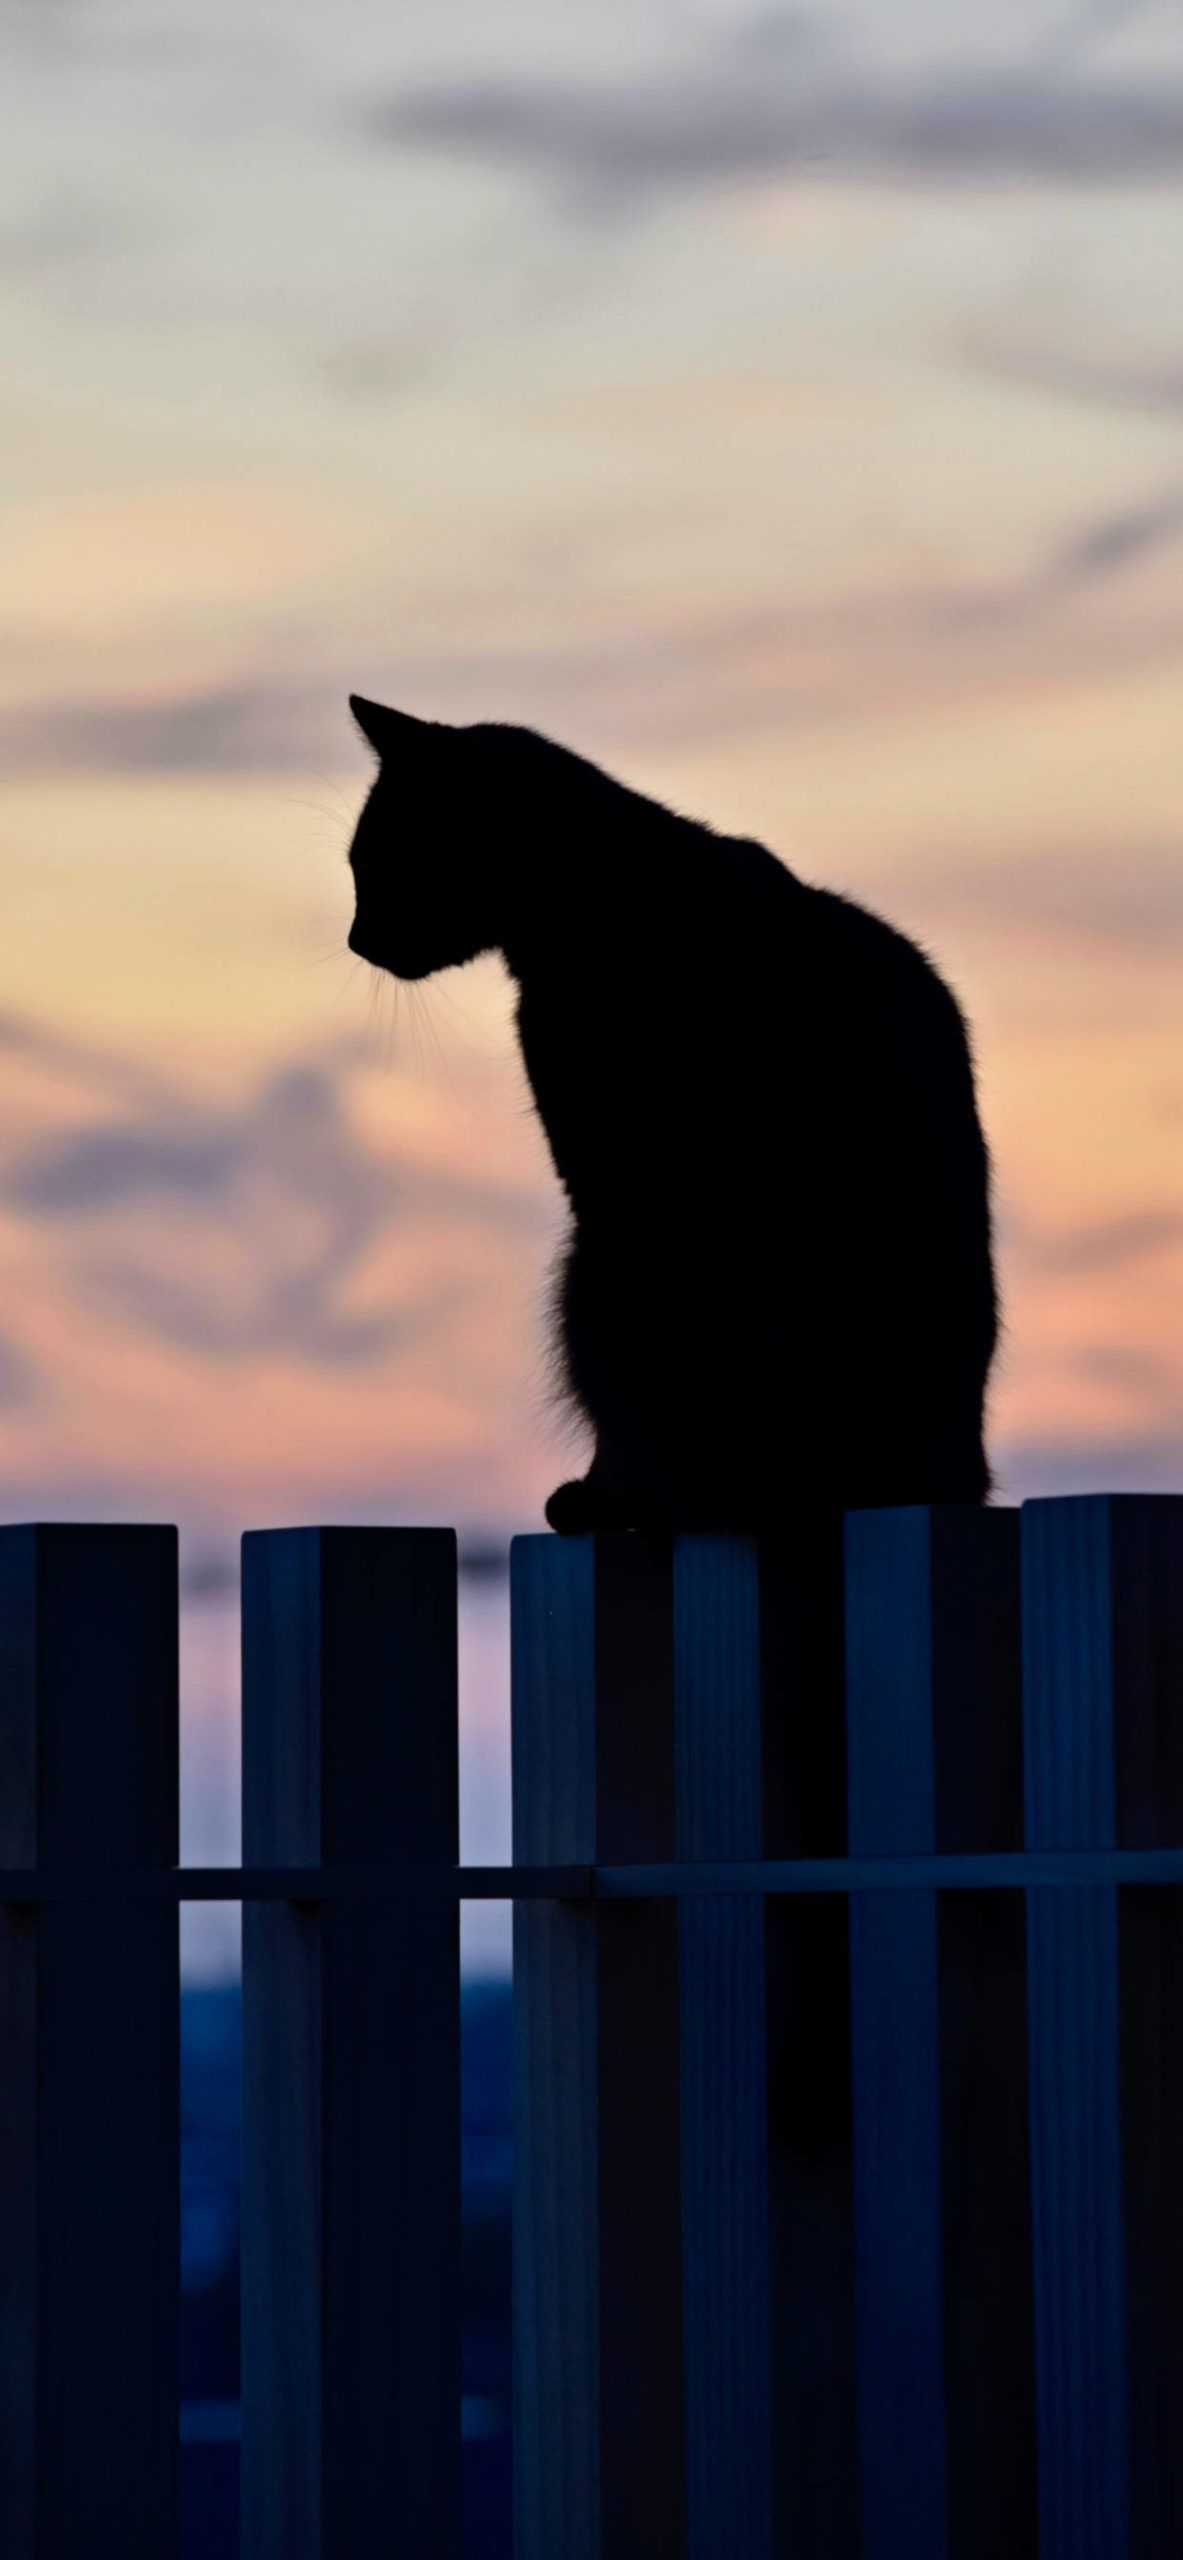 A cat sitting on top of the fence - Cat